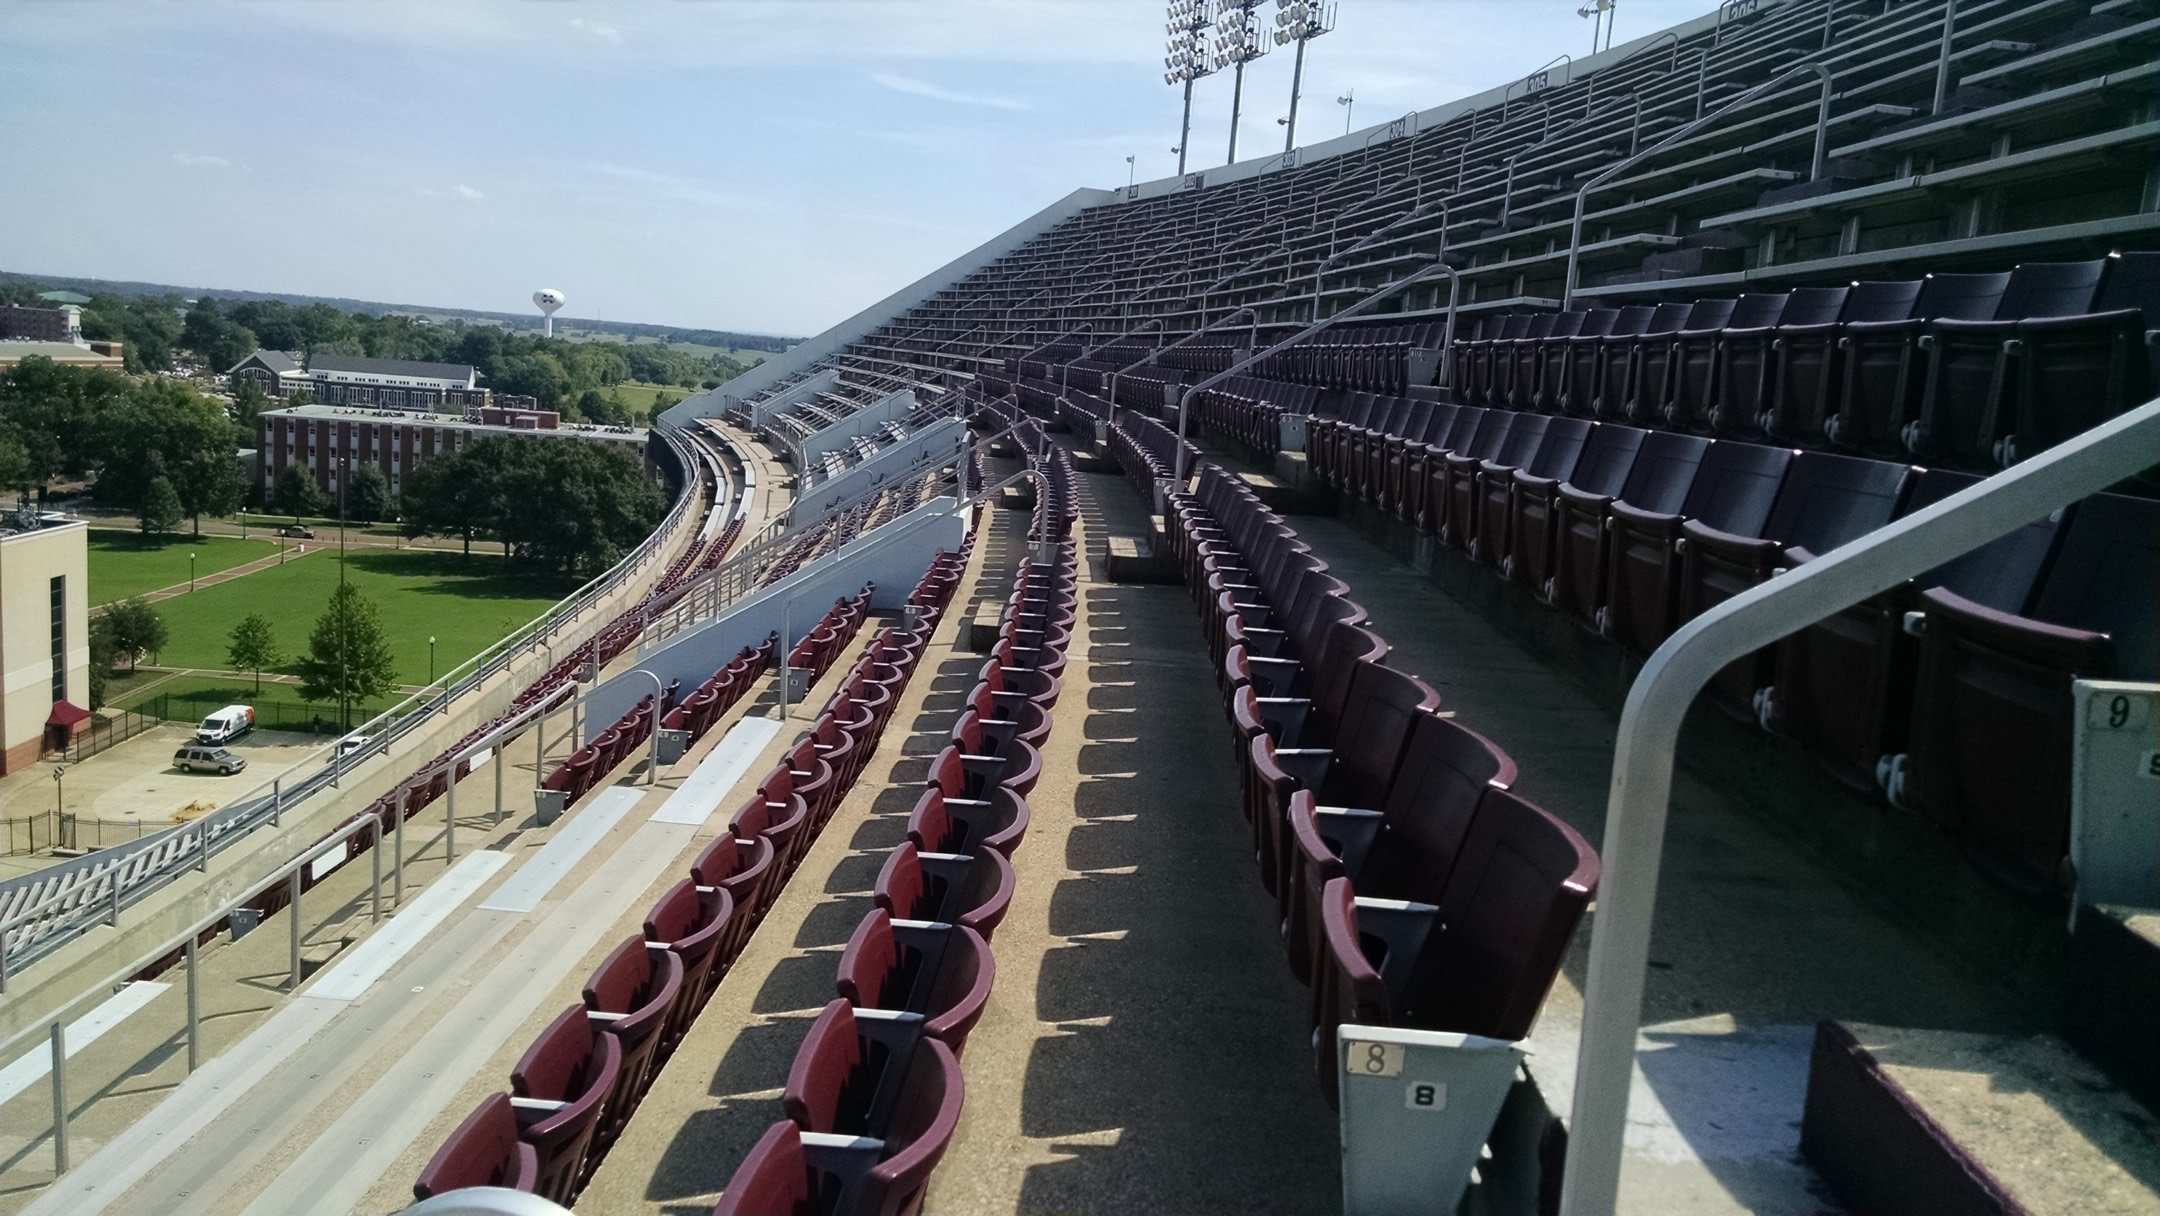 Mississippi State Football Seating Chart